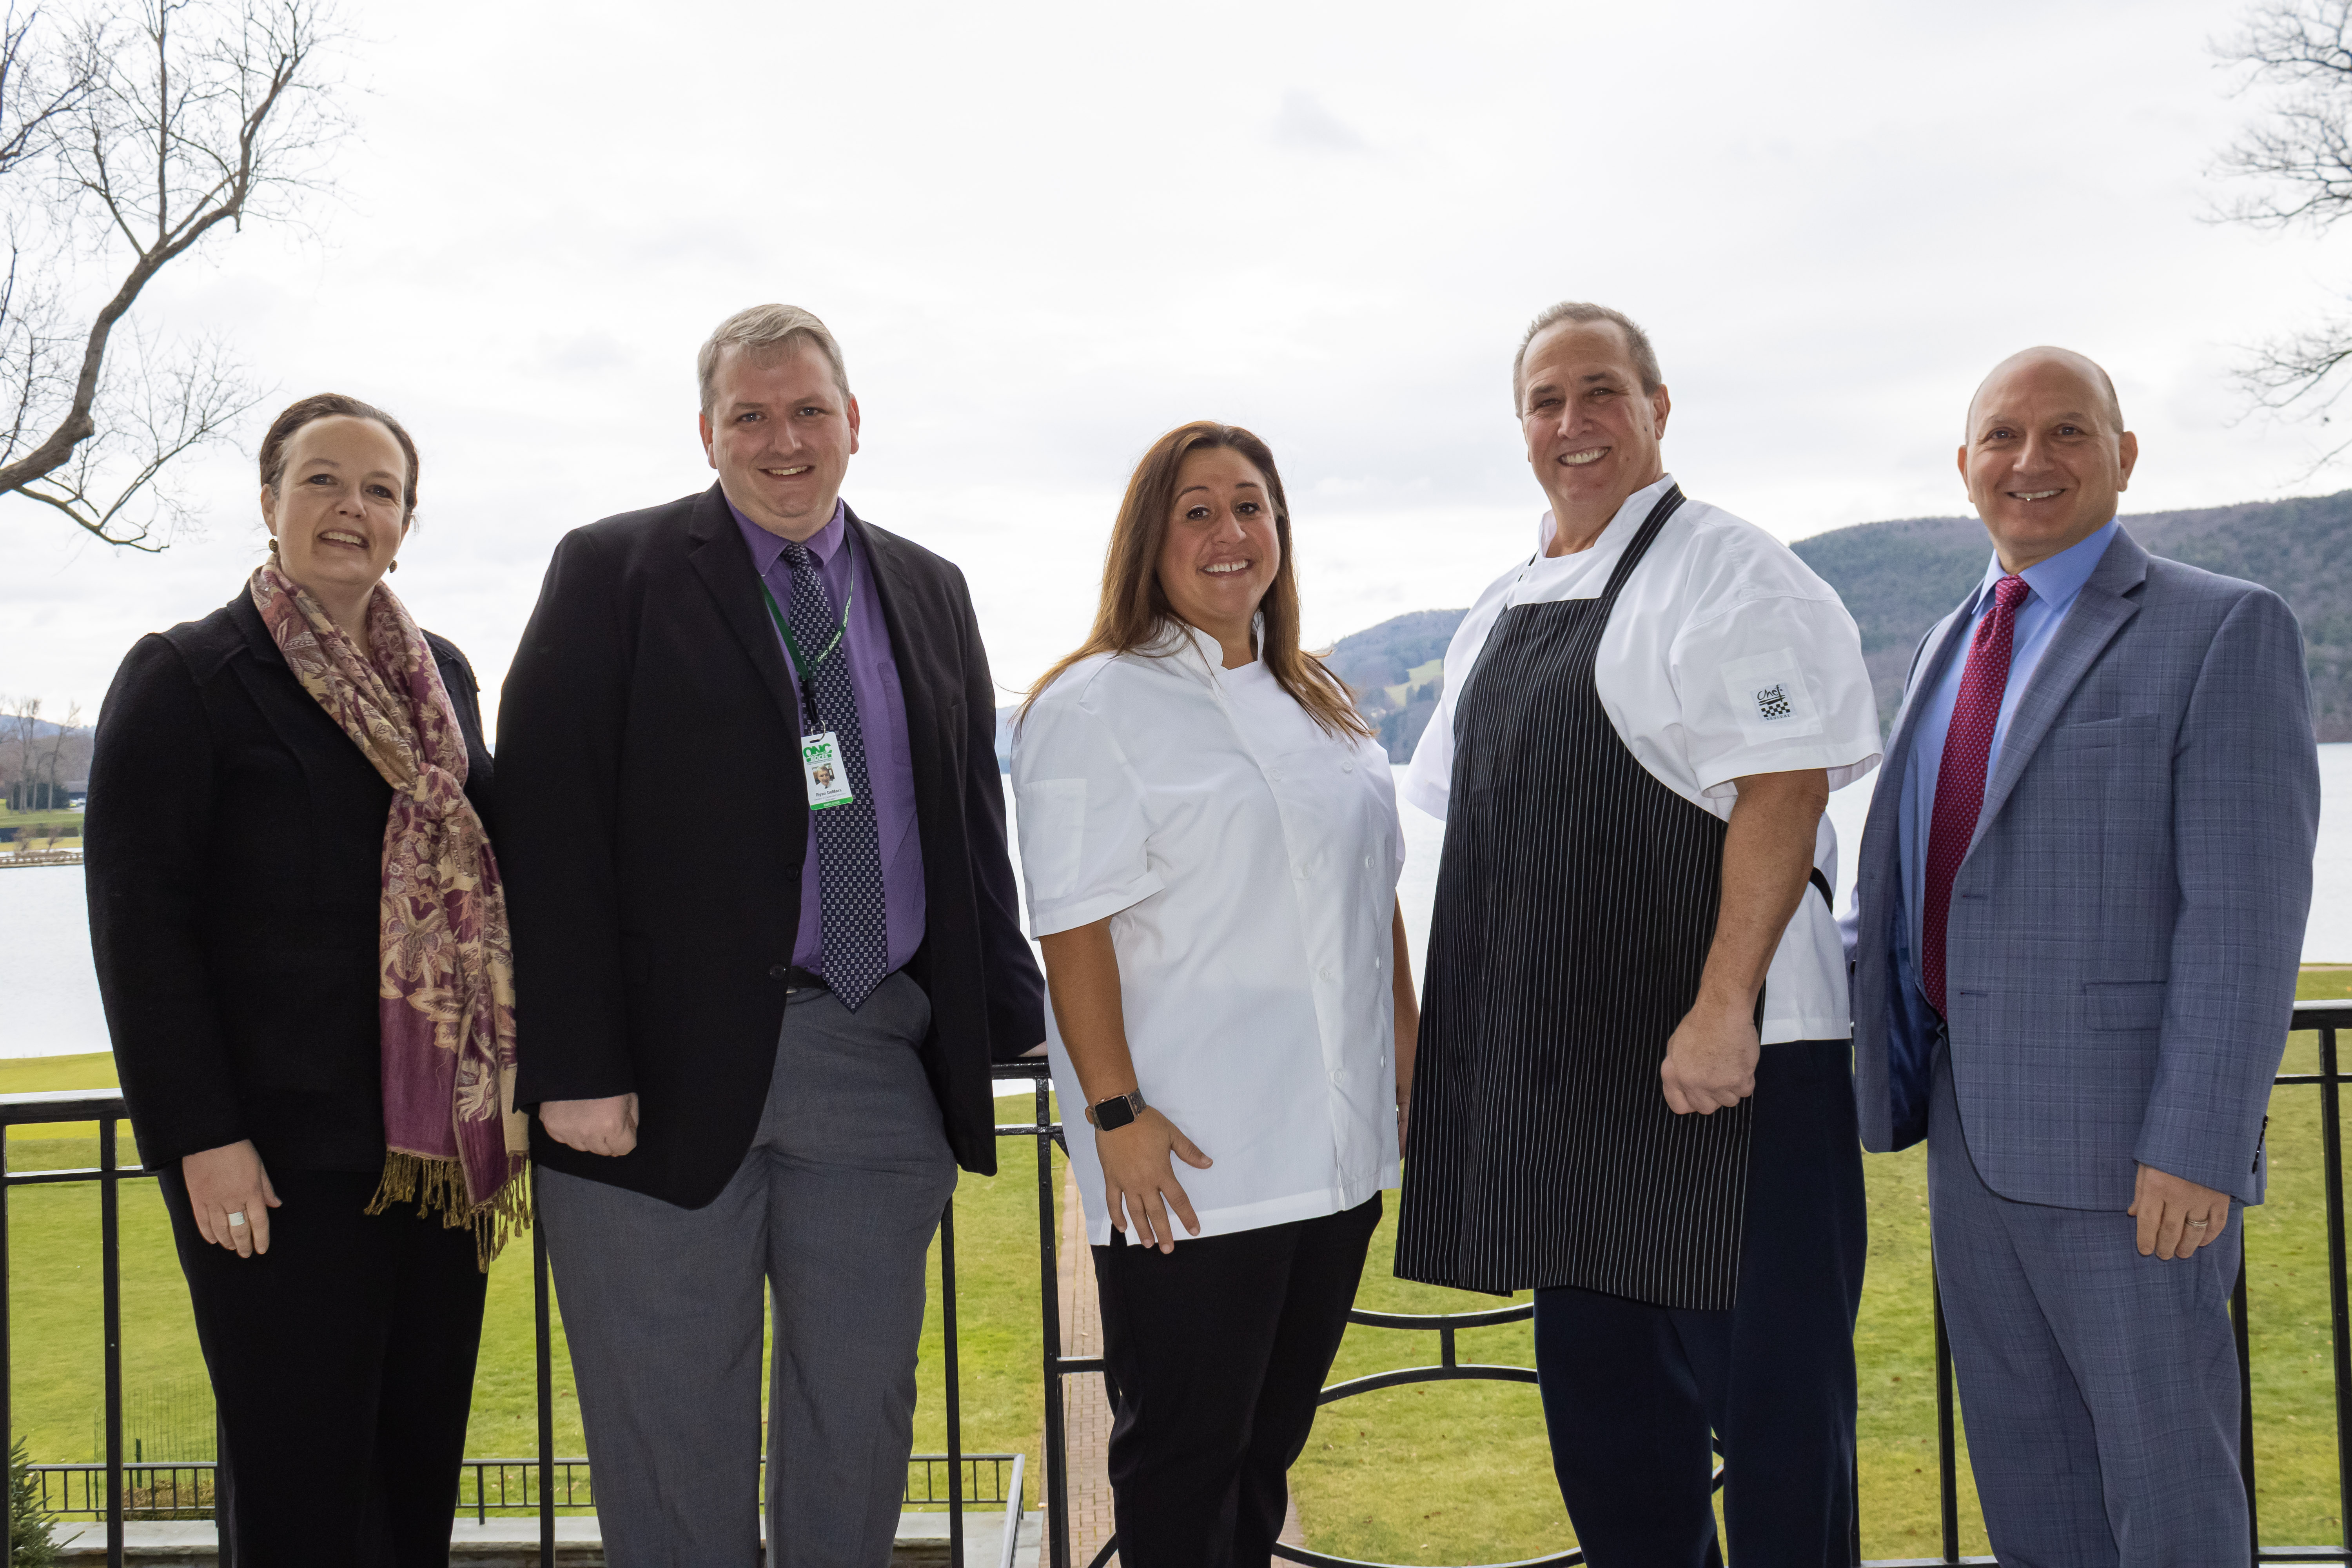 Pictured left to right: Dr. Catherine Huber, ONC BOCES District Superintendent, Ryan DeMars, ONC BOCES Director of CTE, Alternative Education and Adult Education, Jody Albano, ONC BOCES Culinary Arts Instructor, Jim Perillo, The Otesaga Resort Executive Chef, Marty Rosenthal, The Otesaga Resort Chief Operating Officer